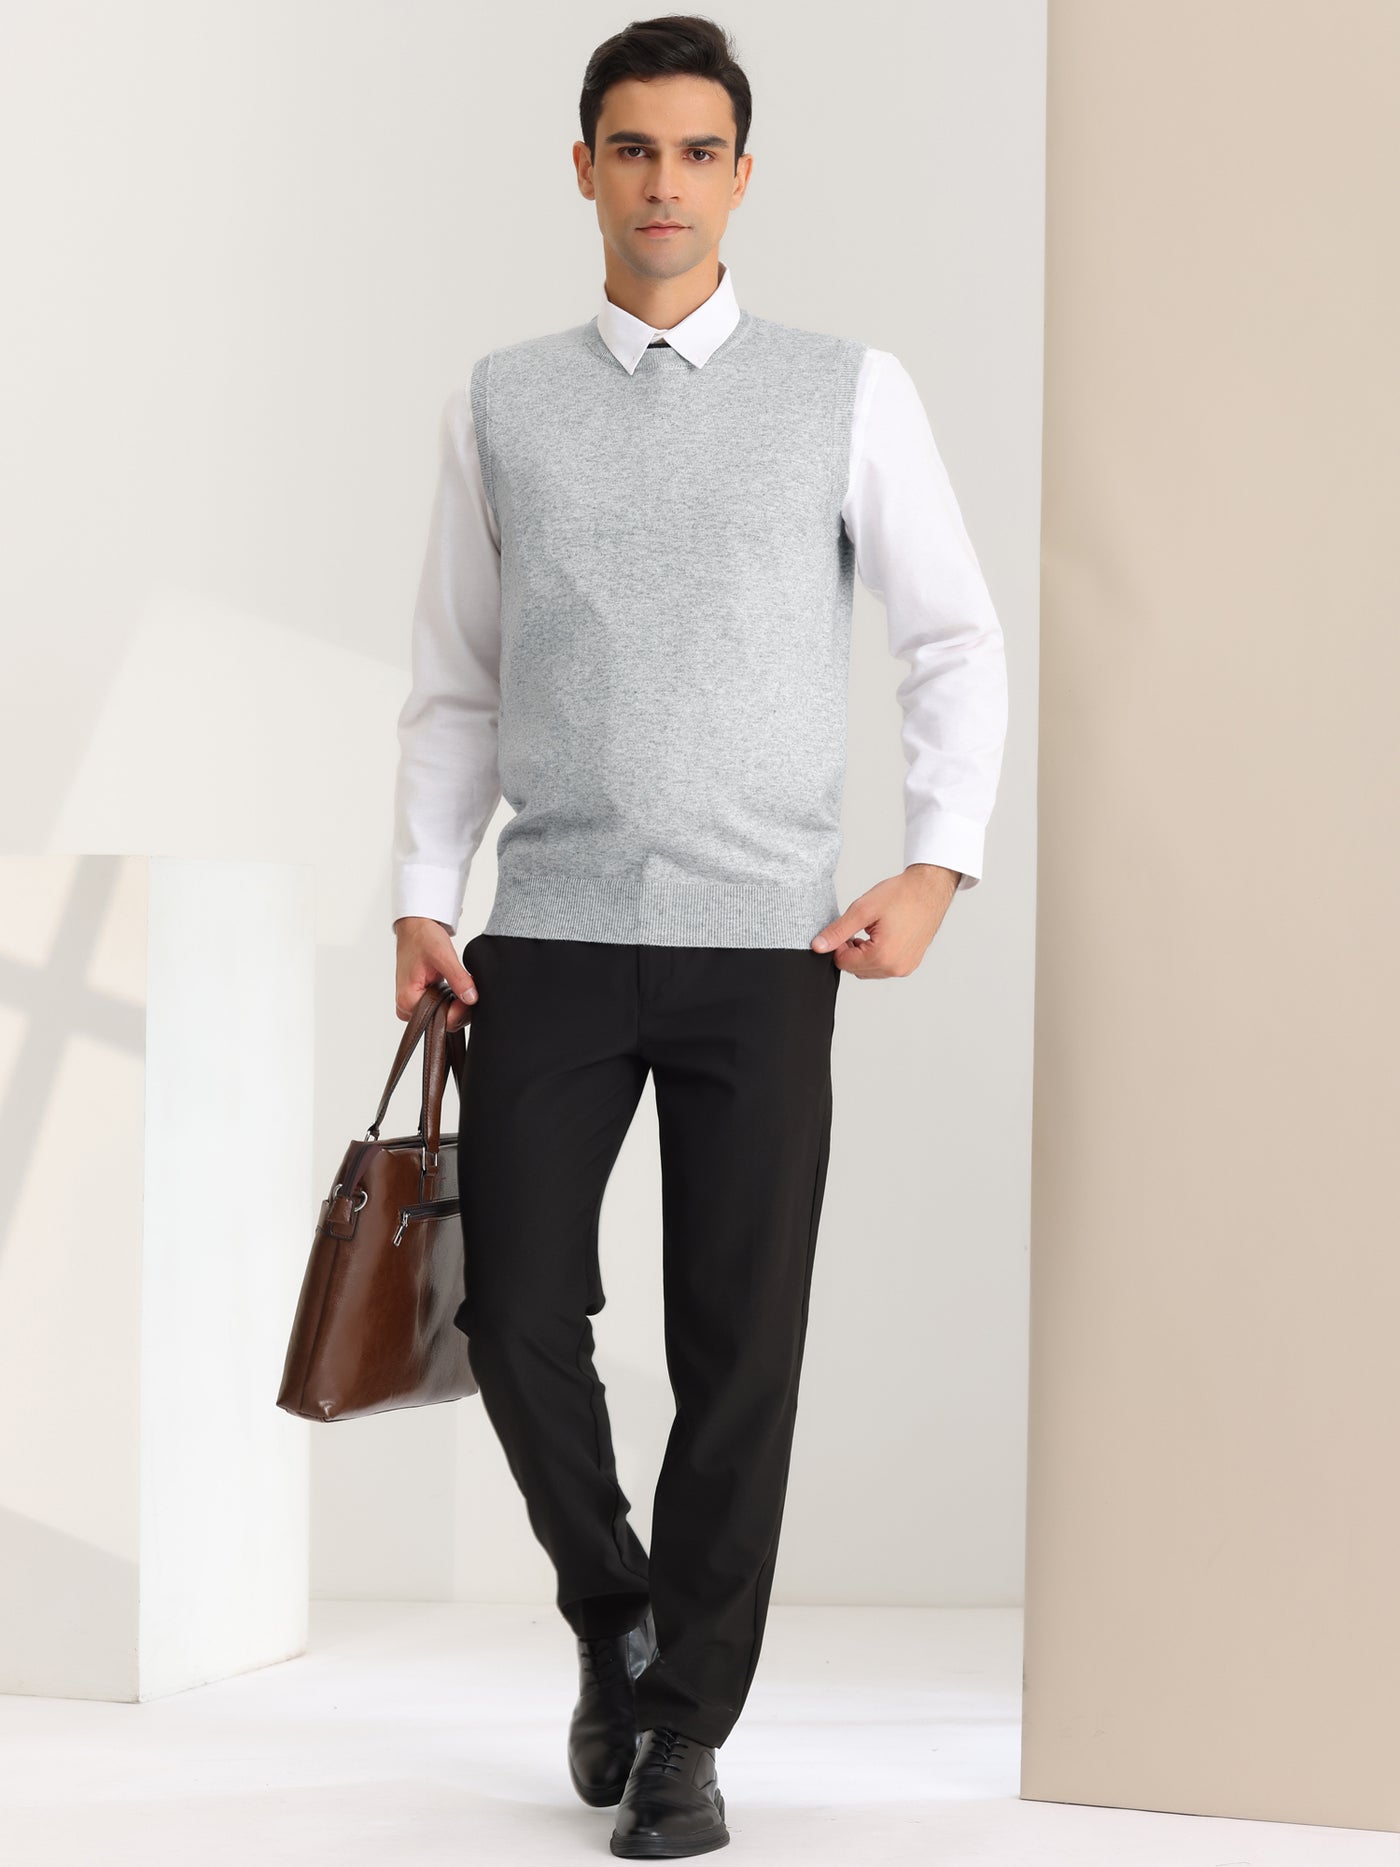 Bublédon Men's Round Neck Solid Color Sleeveless Knitted Pullover Sweater Vest